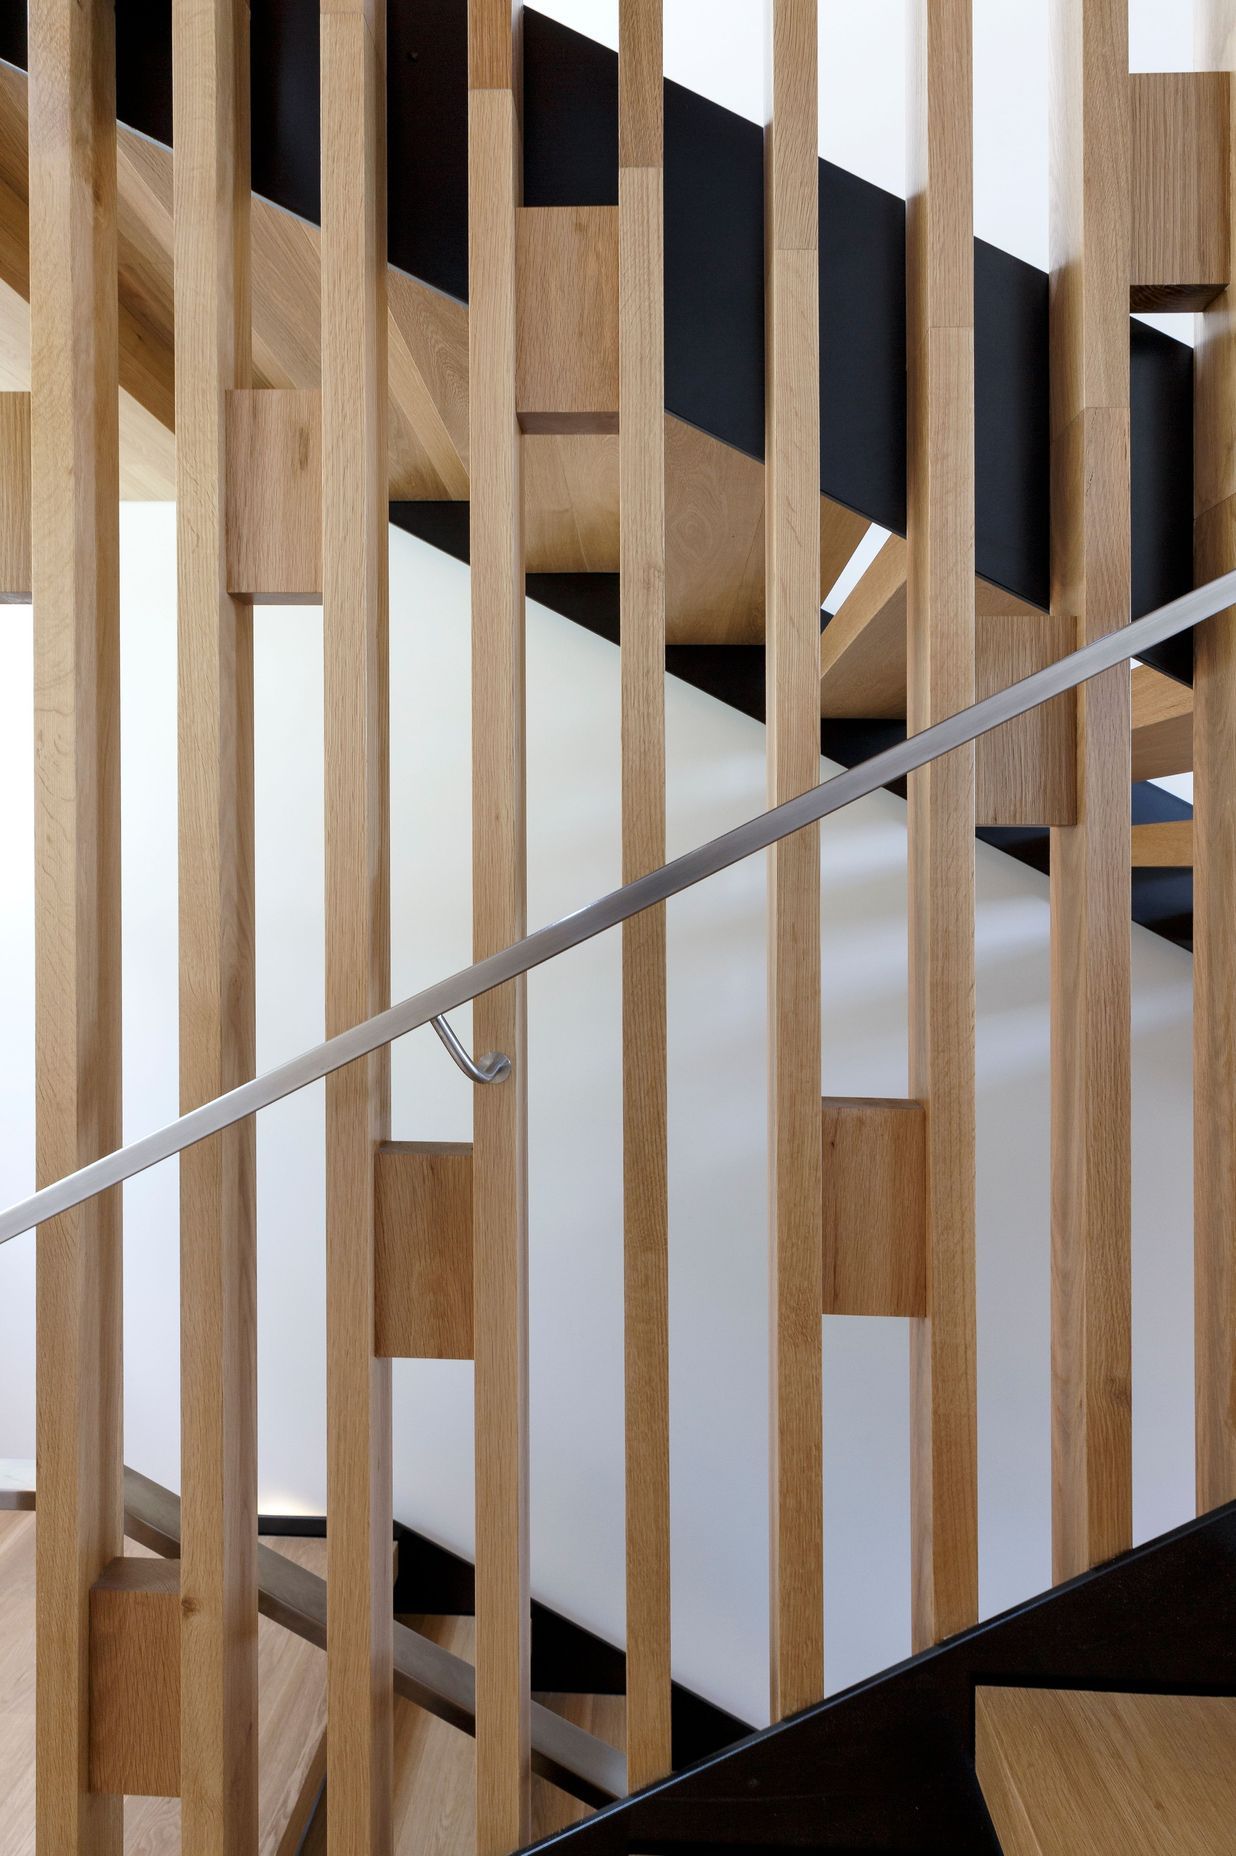 Timber blocks add bracing and pattern to the balustrade of the staircase.